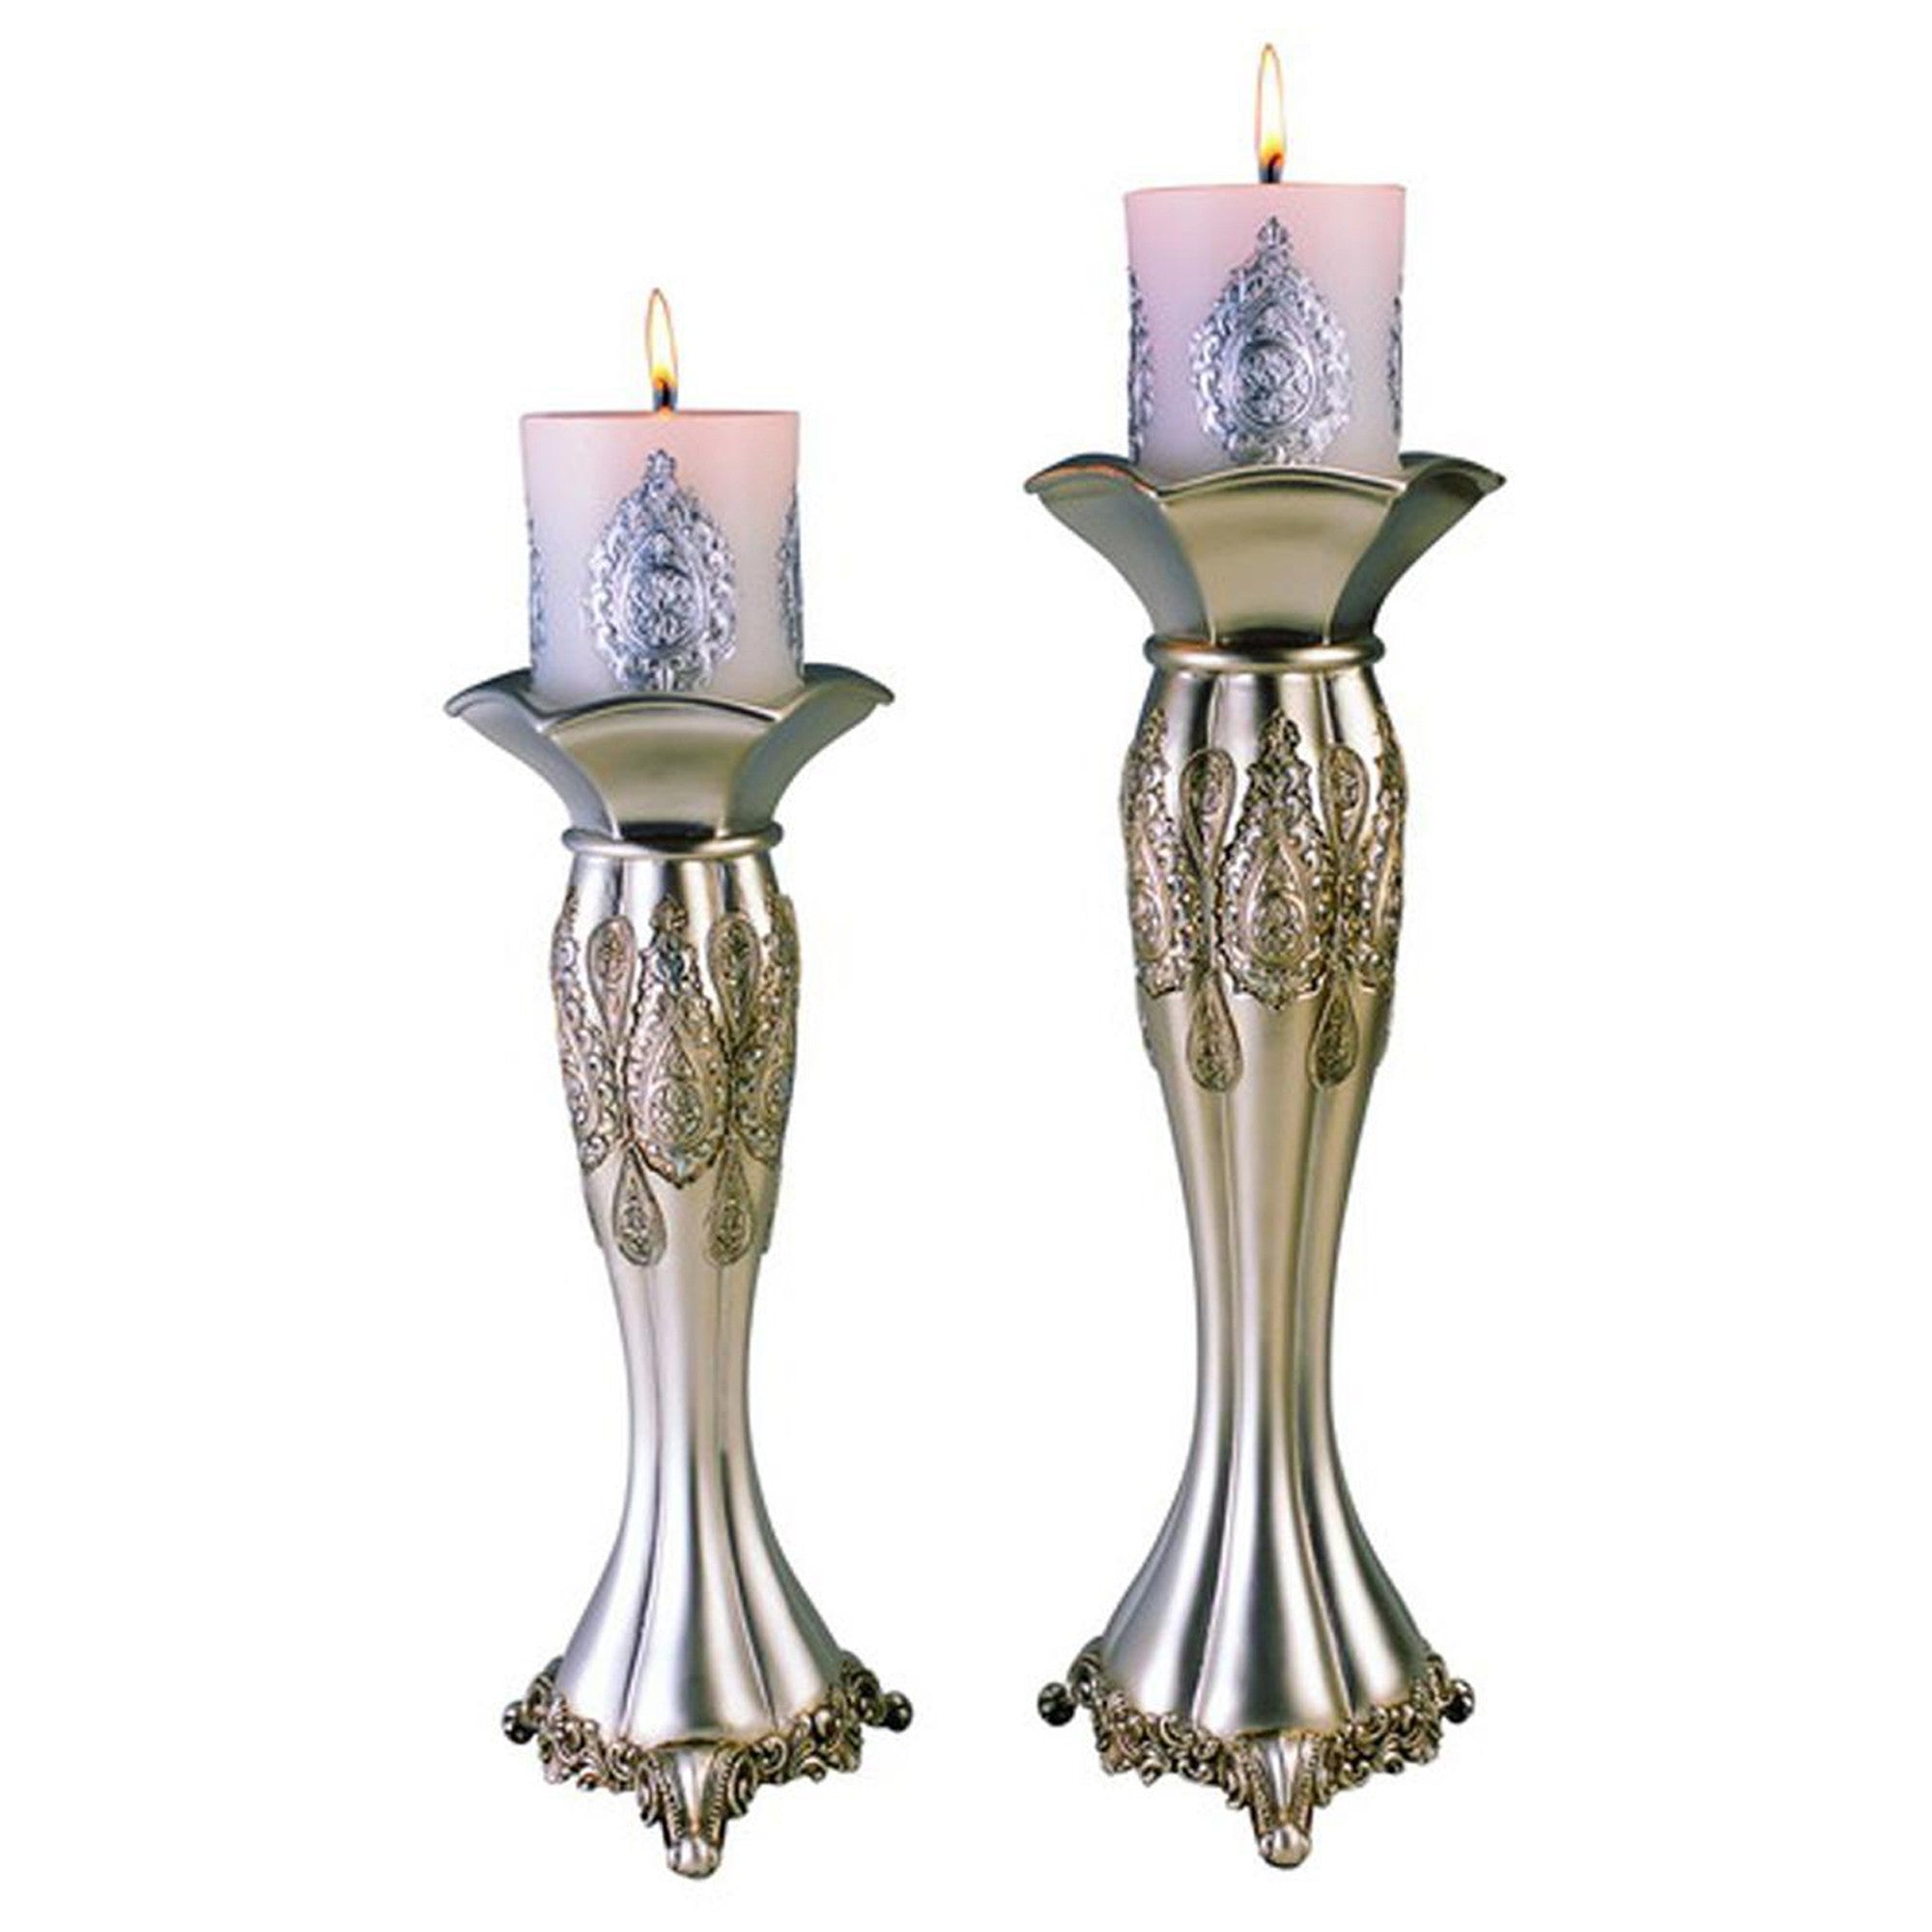 Set Of Two Silver Tabletop Pillar Candle Holders